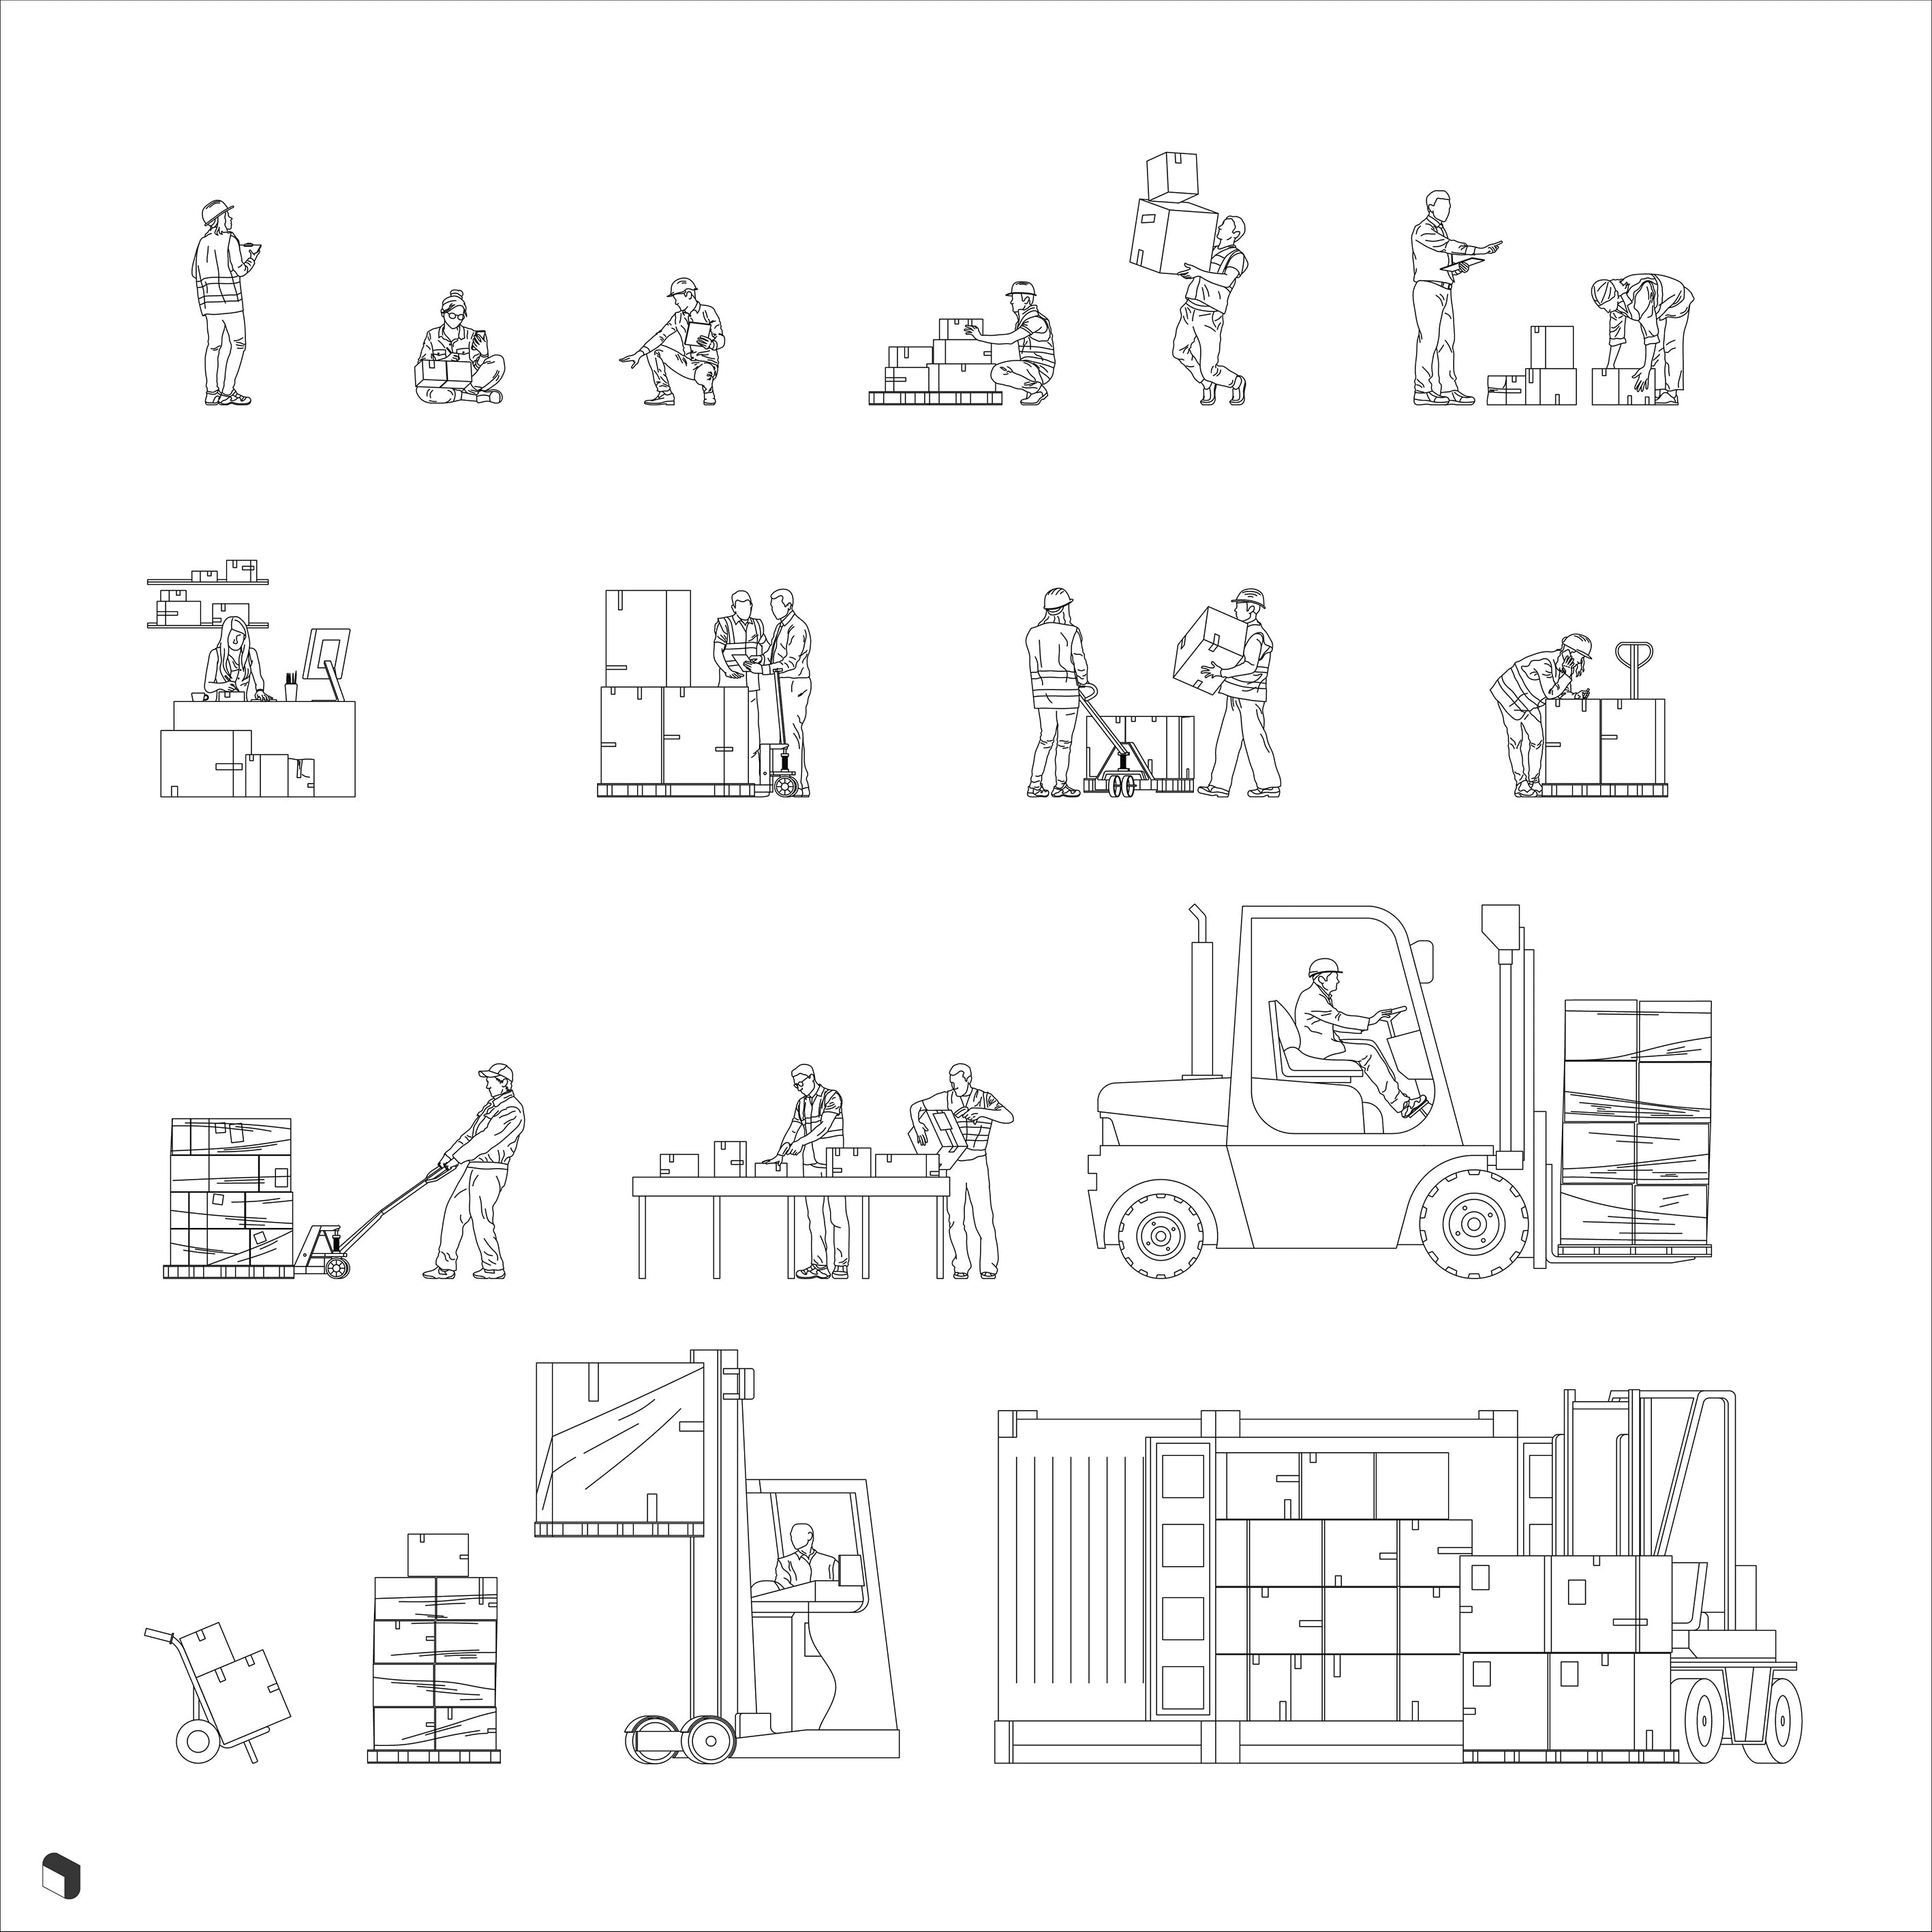 Cad Warehouse People DWG | Toffu Co